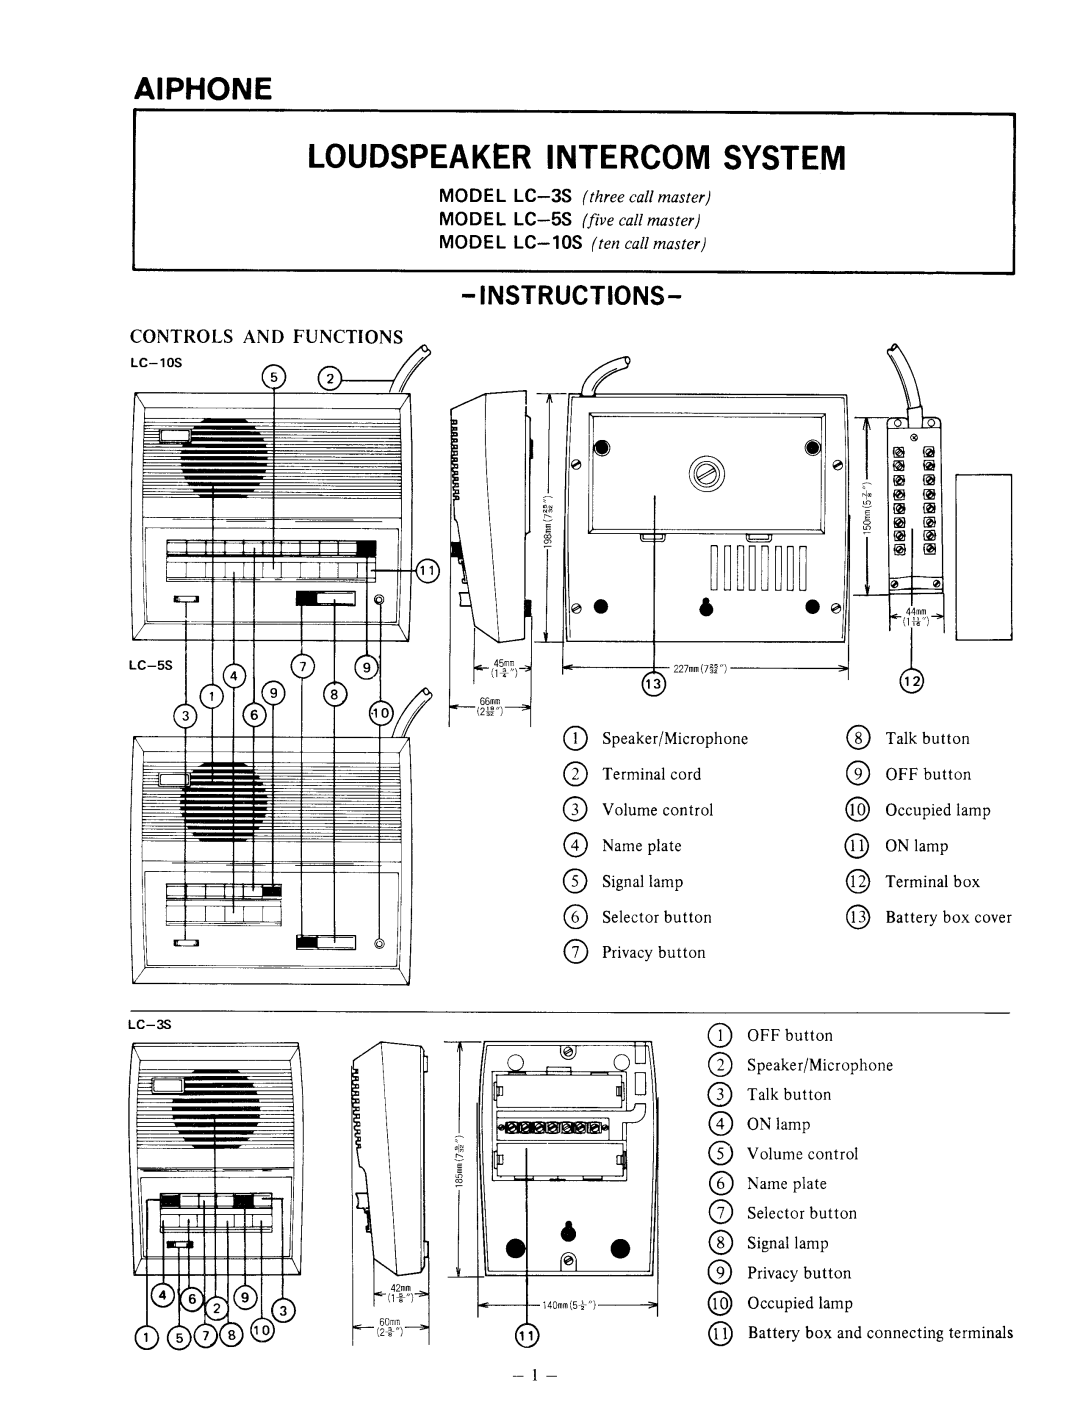 Aiphone Model LC-3S manual 